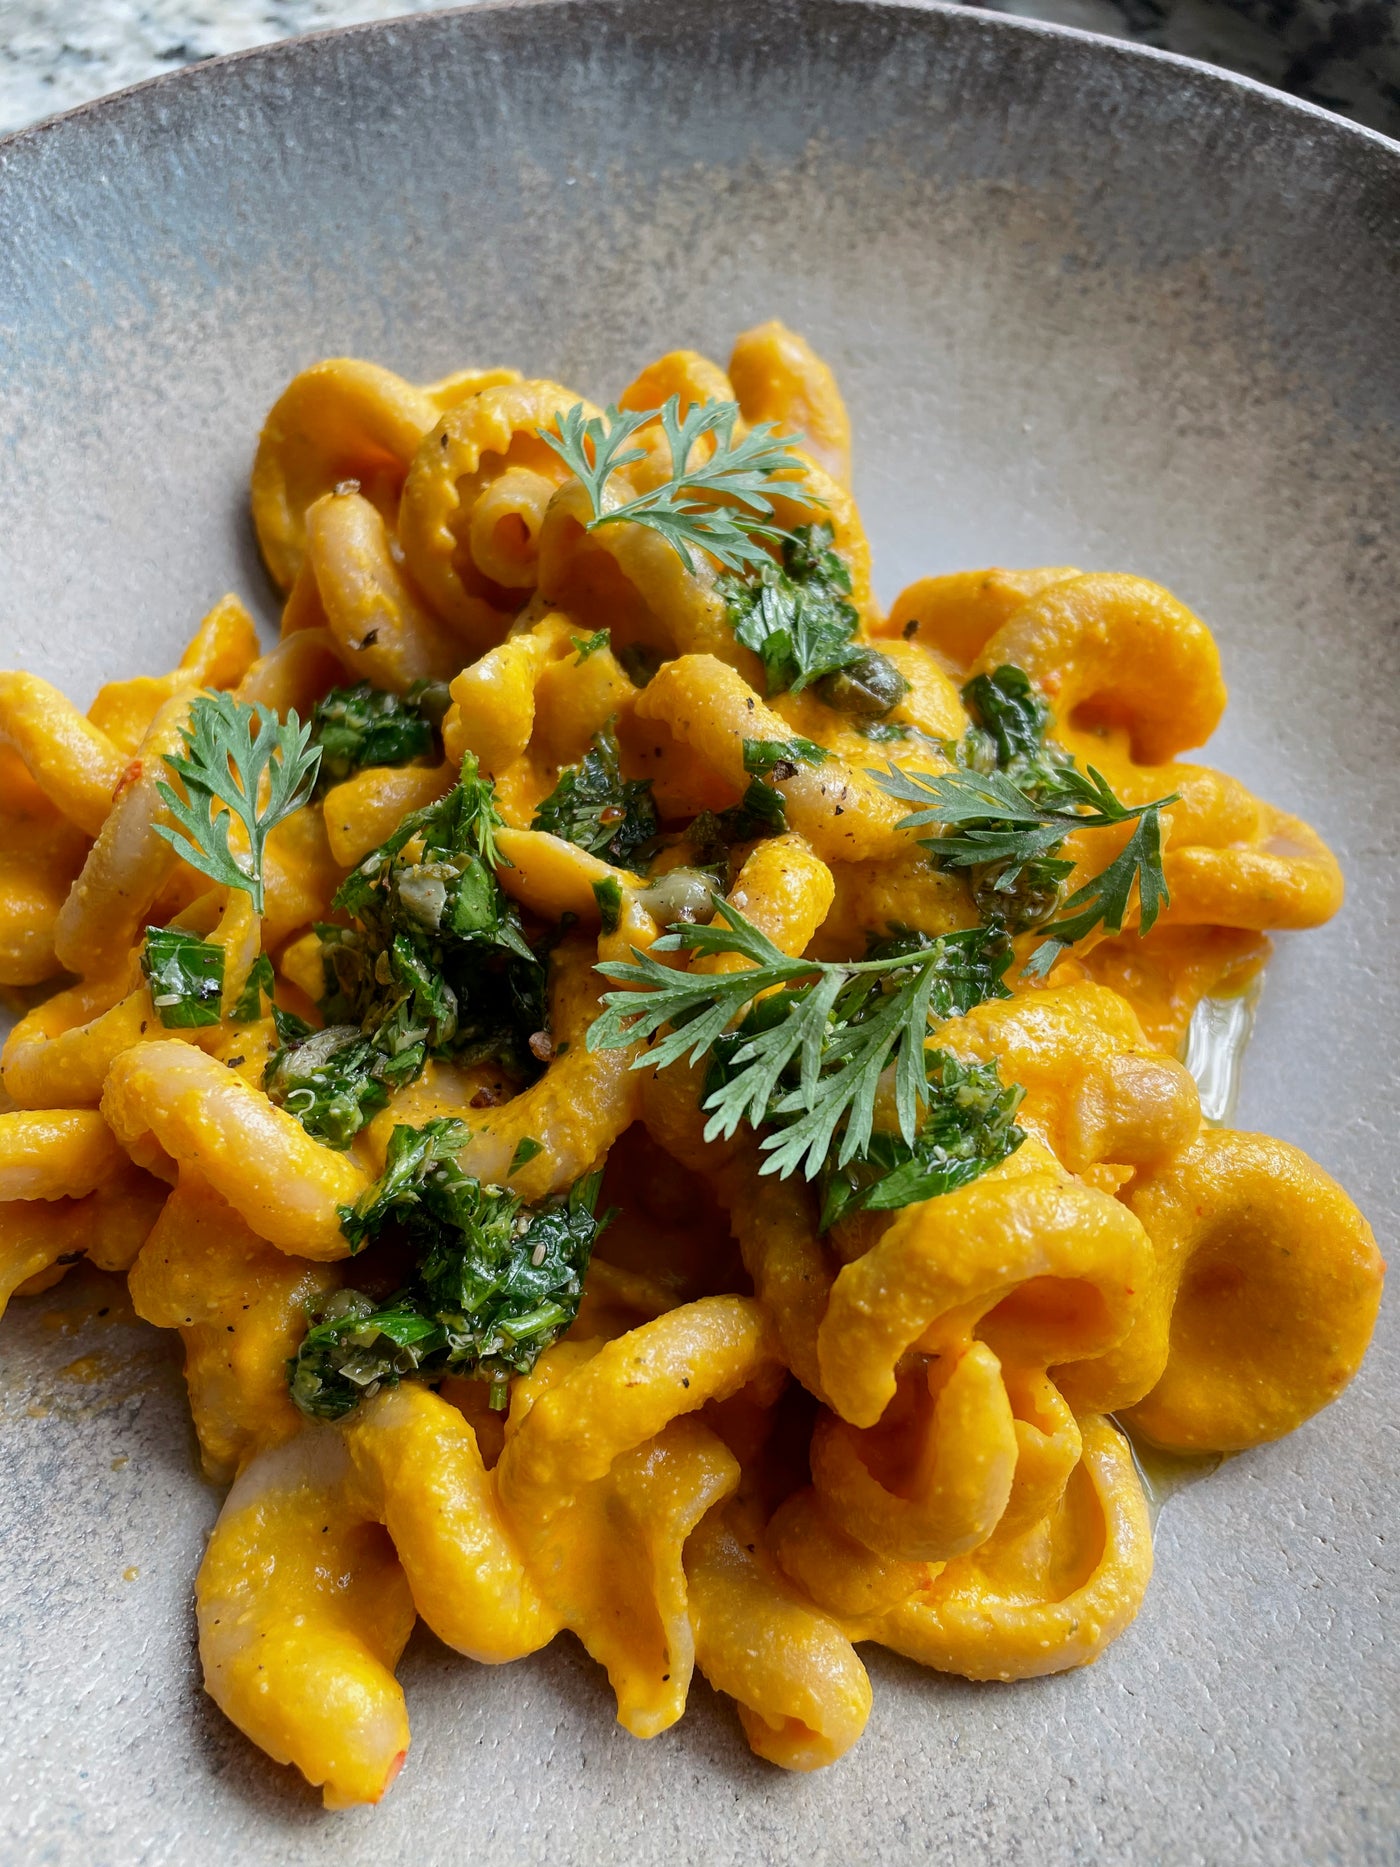 Spicy Carrot Pasta with Salsa Verde